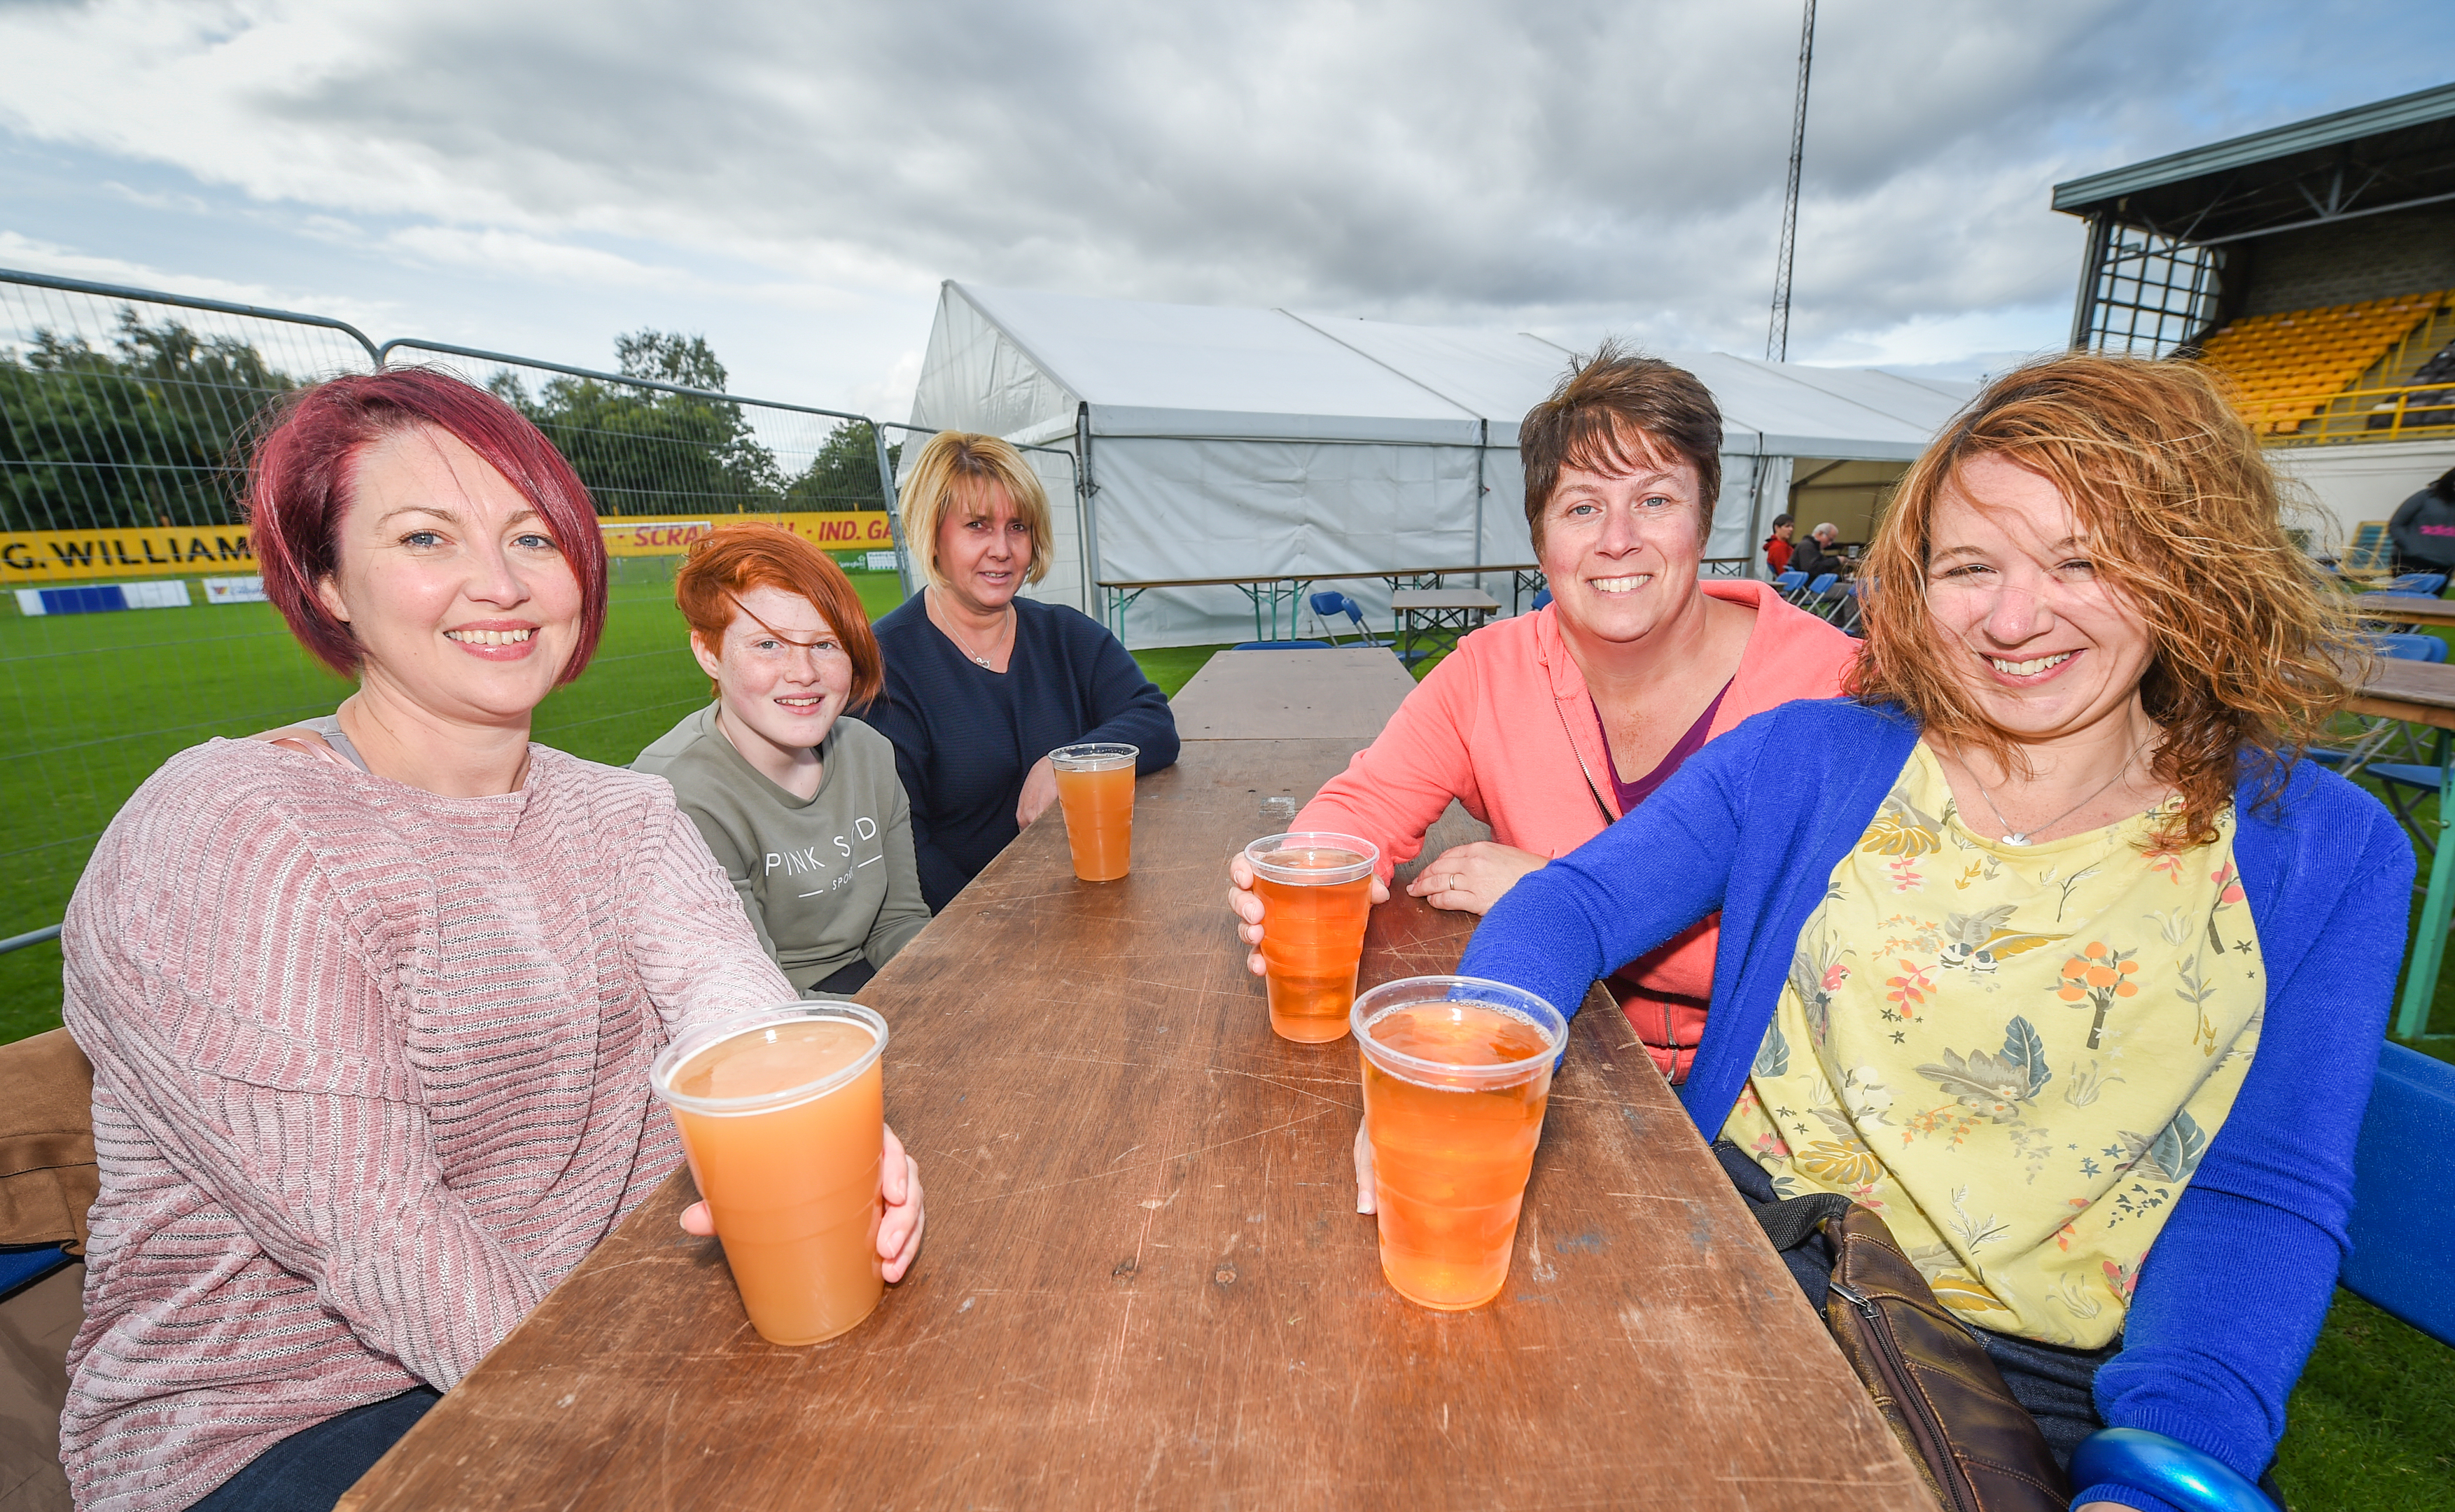 15/09/2018 - Pictures show beer festival goer's at Forres Mechanics Ground where the Pitch Perfect Beer festival is taking place today - Pictures by JASON HEDGES    

Picture L2R - Pauline and Rachael Ballingall, Lynn Allan, Denise Welsh and Melanie Ollvant from Forres.